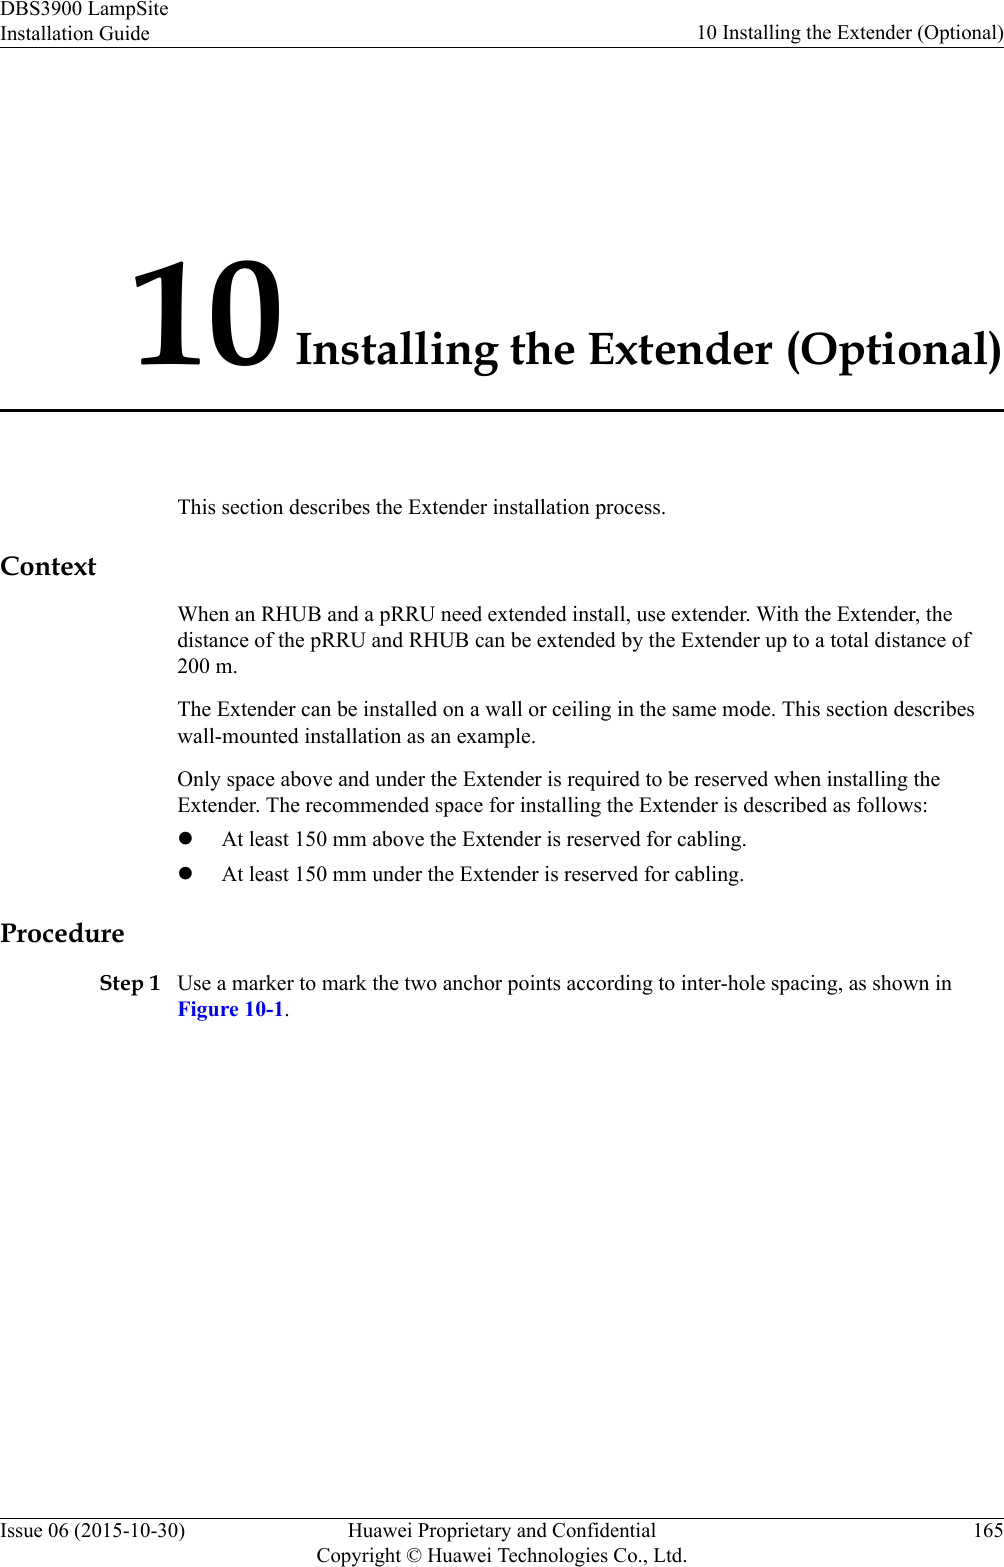 10 Installing the Extender (Optional)This section describes the Extender installation process.ContextWhen an RHUB and a pRRU need extended install, use extender. With the Extender, thedistance of the pRRU and RHUB can be extended by the Extender up to a total distance of200 m.The Extender can be installed on a wall or ceiling in the same mode. This section describeswall-mounted installation as an example.Only space above and under the Extender is required to be reserved when installing theExtender. The recommended space for installing the Extender is described as follows:lAt least 150 mm above the Extender is reserved for cabling.lAt least 150 mm under the Extender is reserved for cabling.ProcedureStep 1 Use a marker to mark the two anchor points according to inter-hole spacing, as shown inFigure 10-1.DBS3900 LampSiteInstallation Guide 10 Installing the Extender (Optional)Issue 06 (2015-10-30) Huawei Proprietary and ConfidentialCopyright © Huawei Technologies Co., Ltd.165